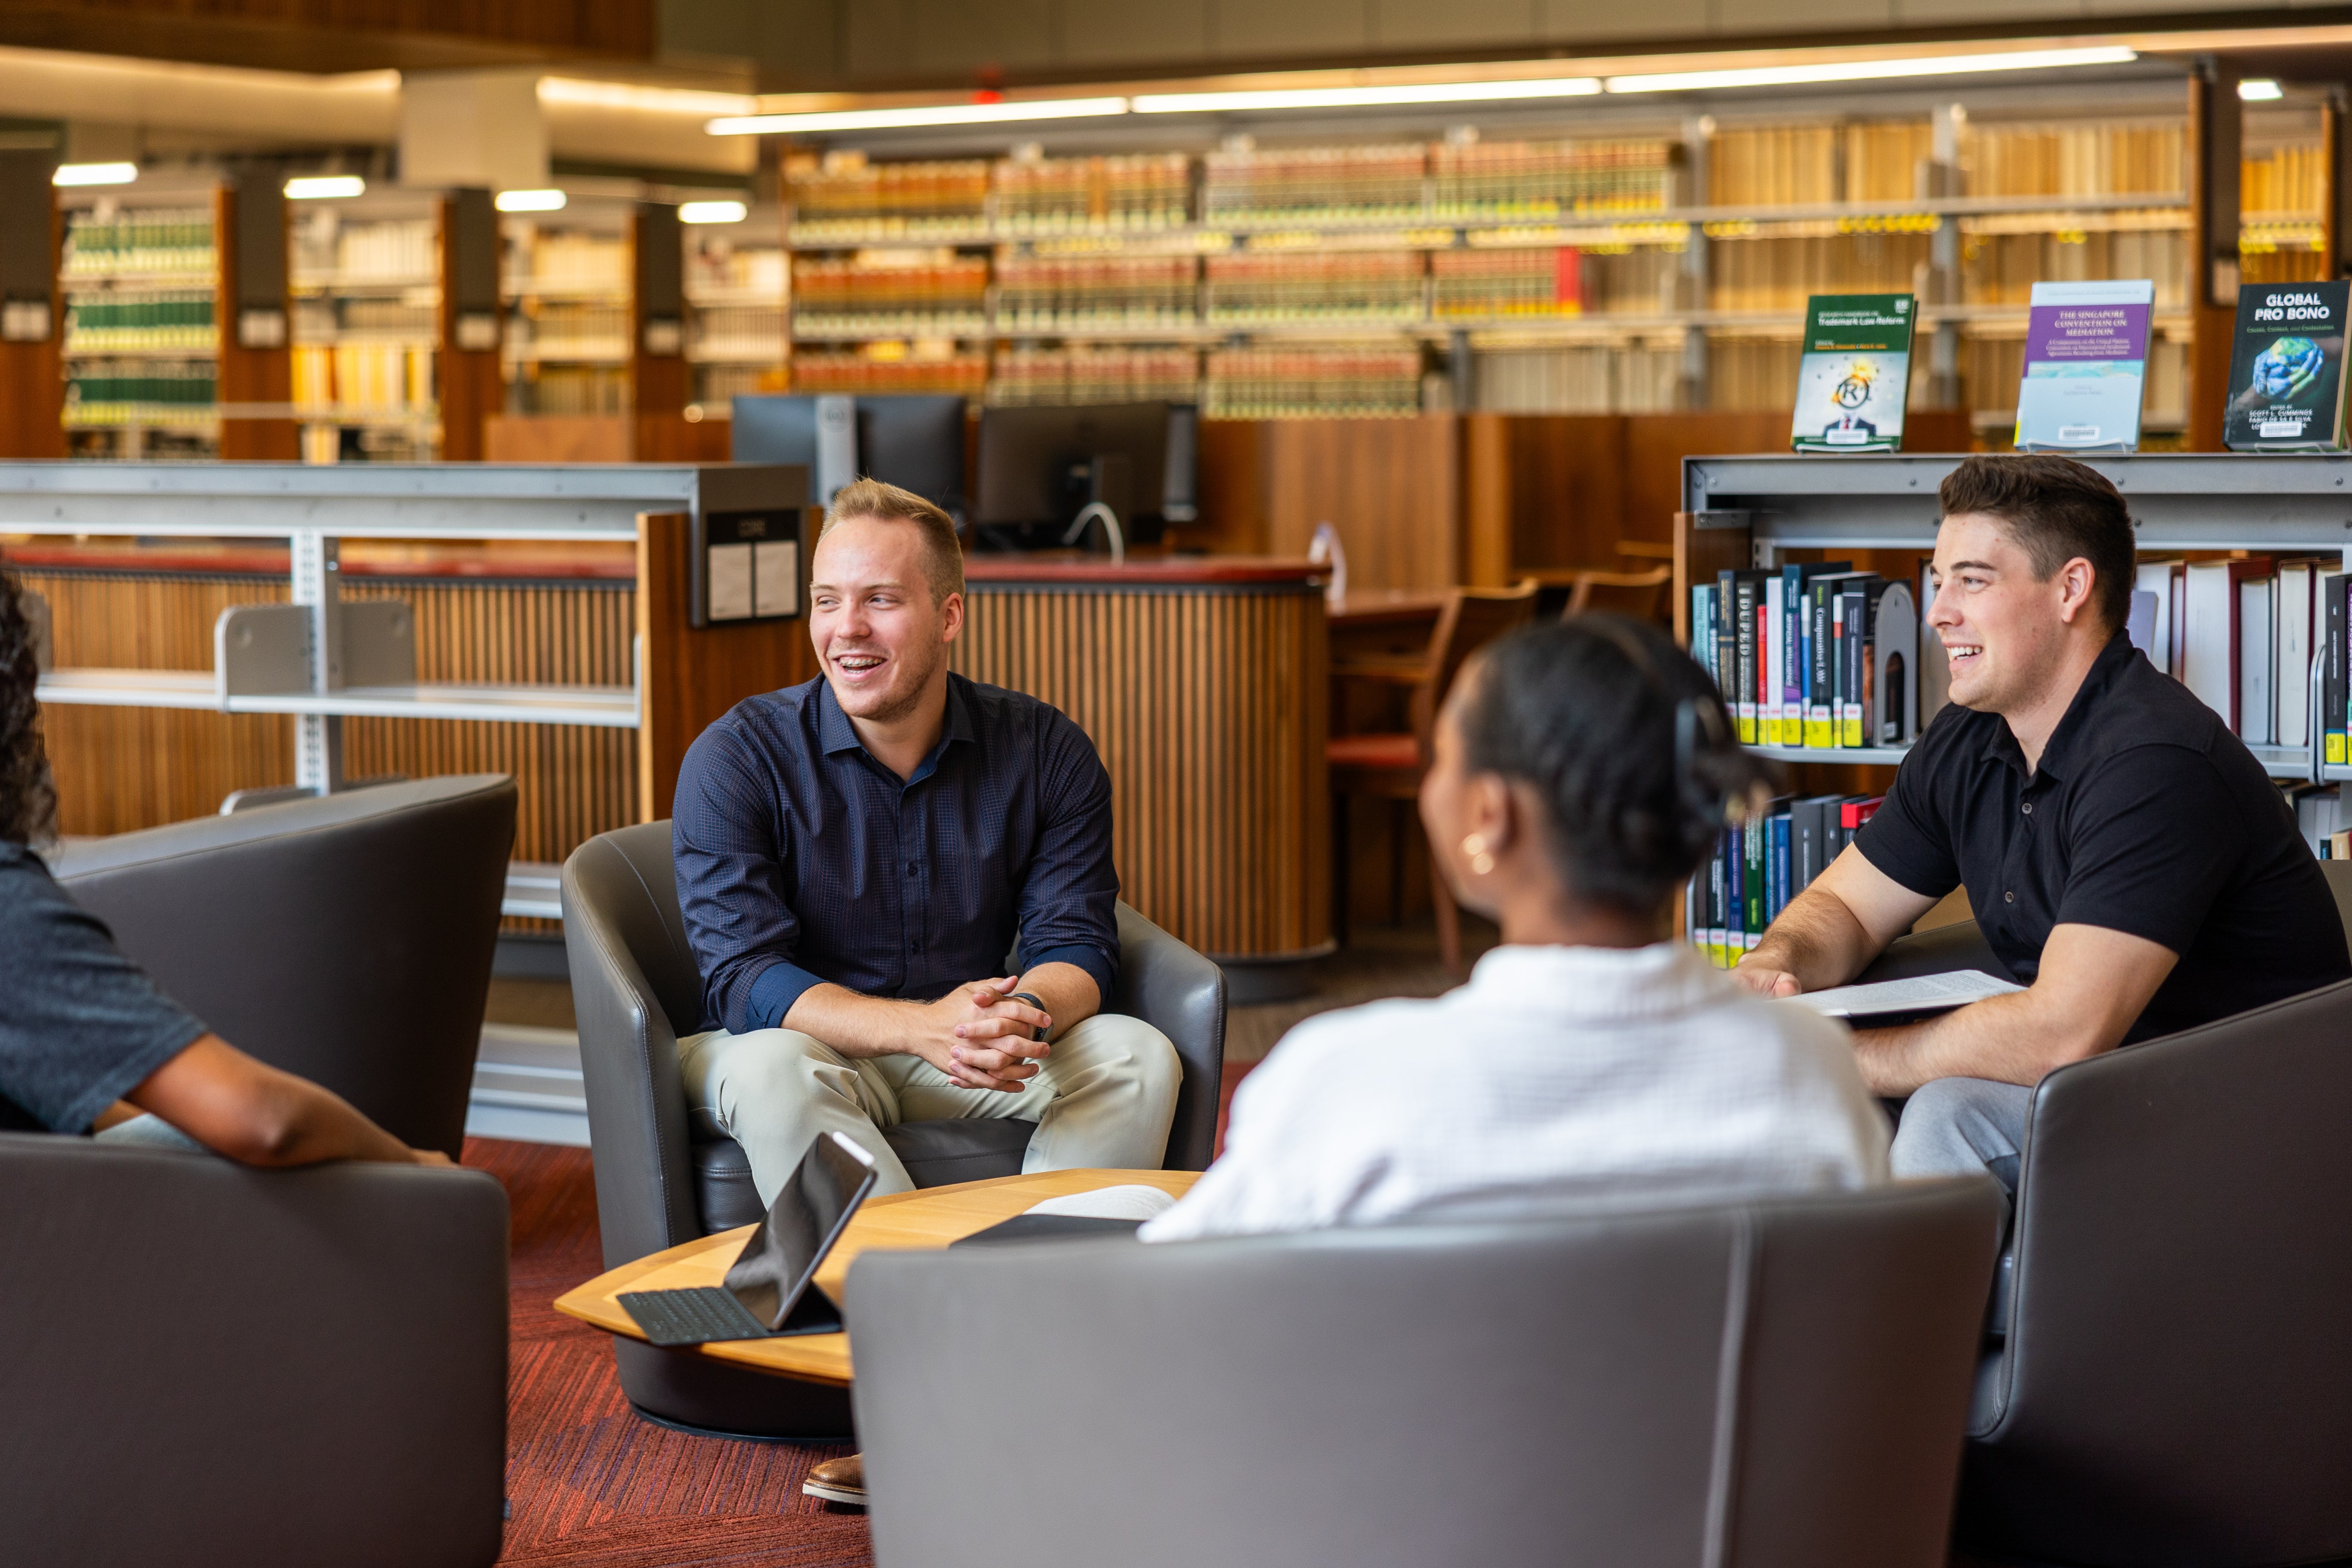 Students seated, chatting in a library